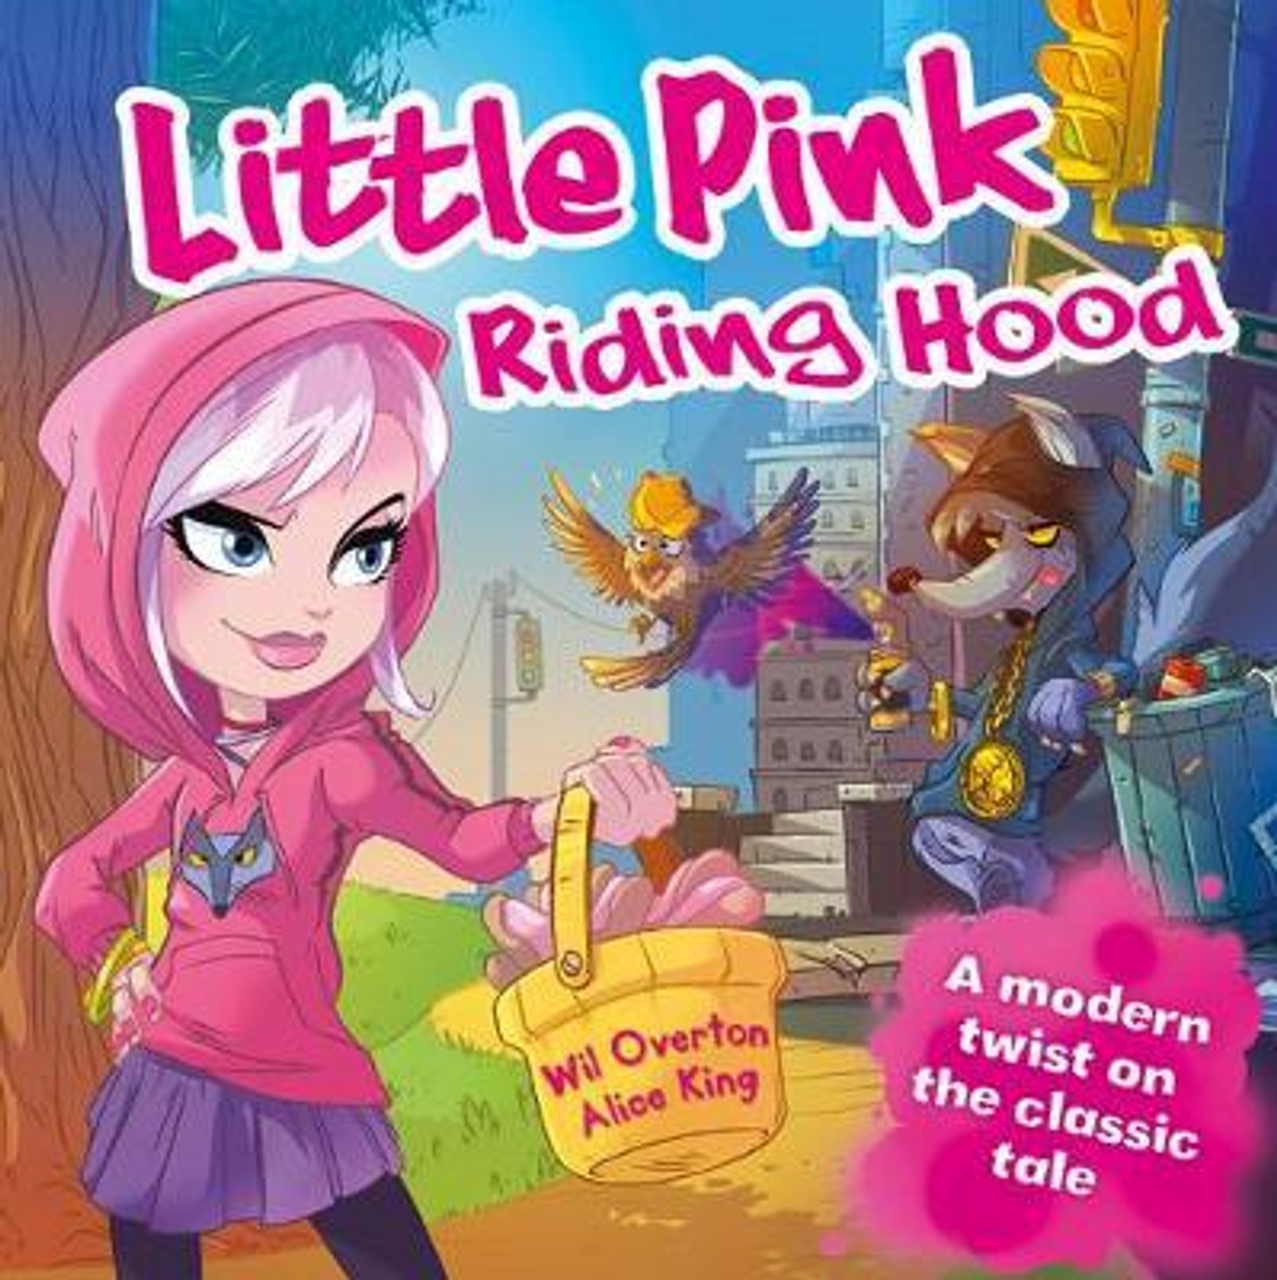 Wil Overton / Little Pink Riding Hood (Children's Picture Book)